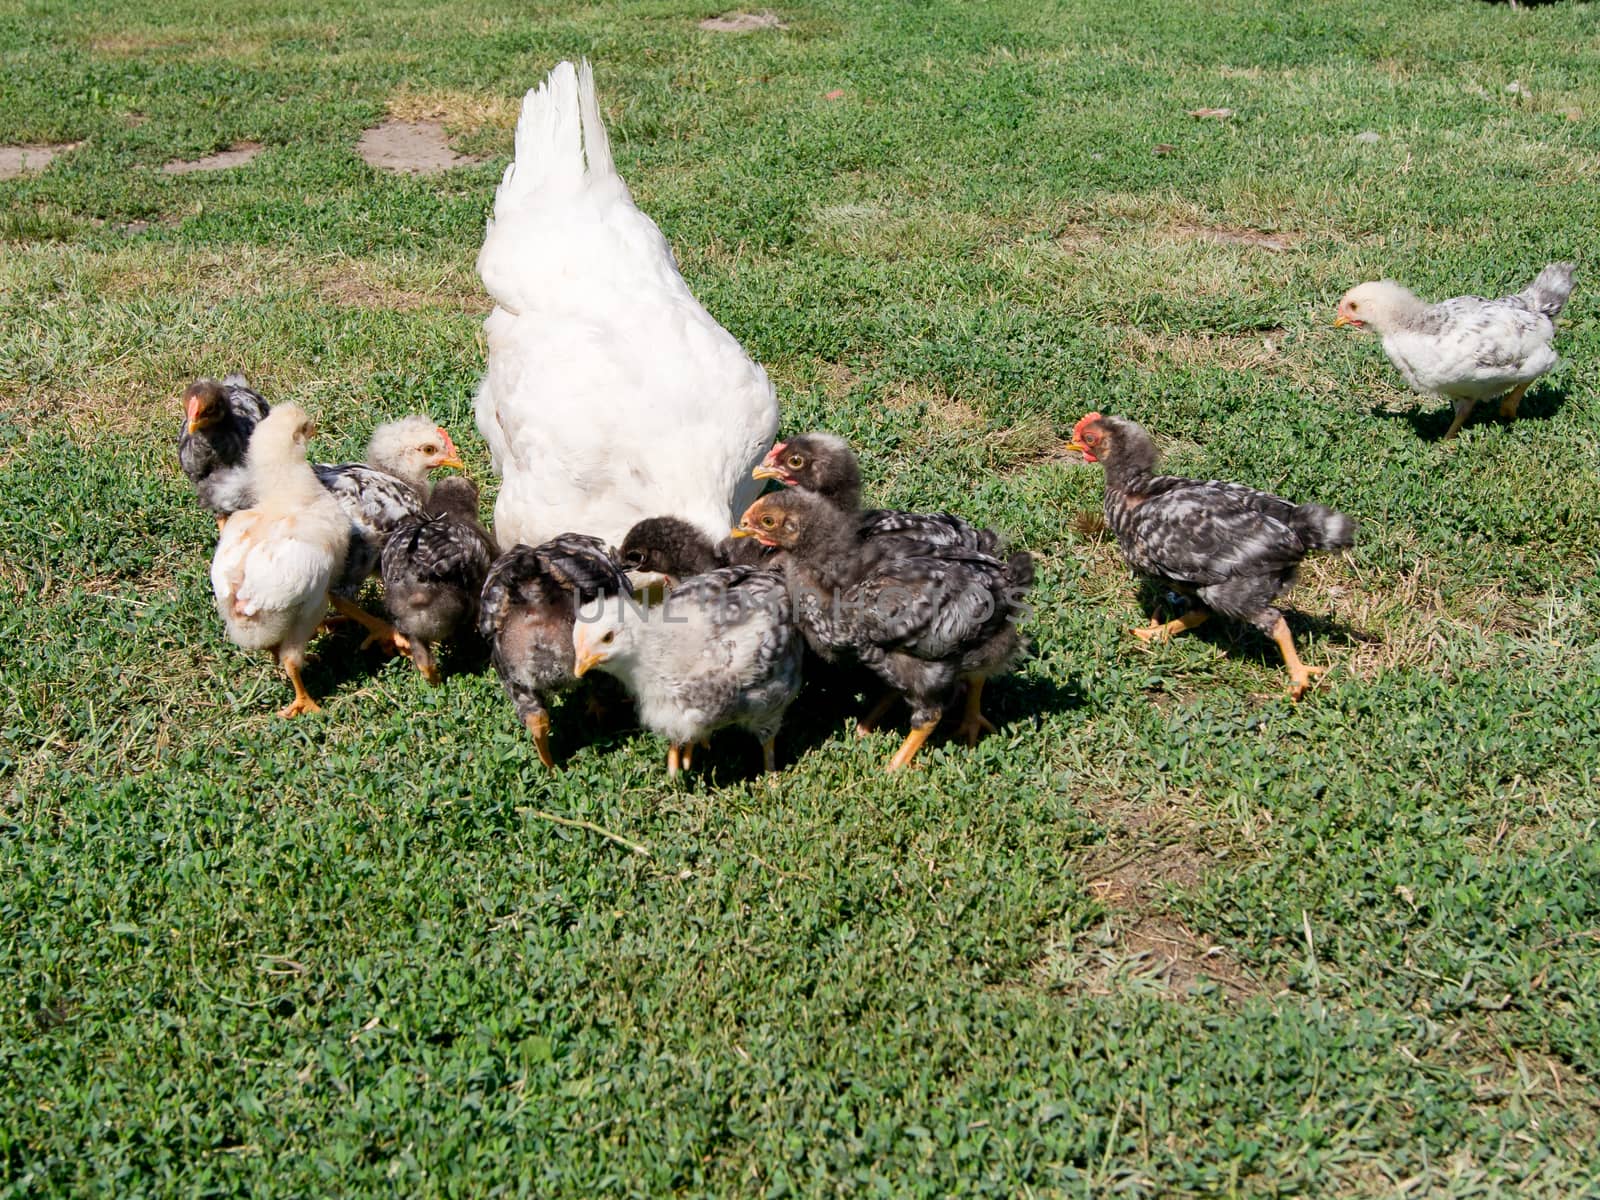 The brooding leads the chicks in the yard.